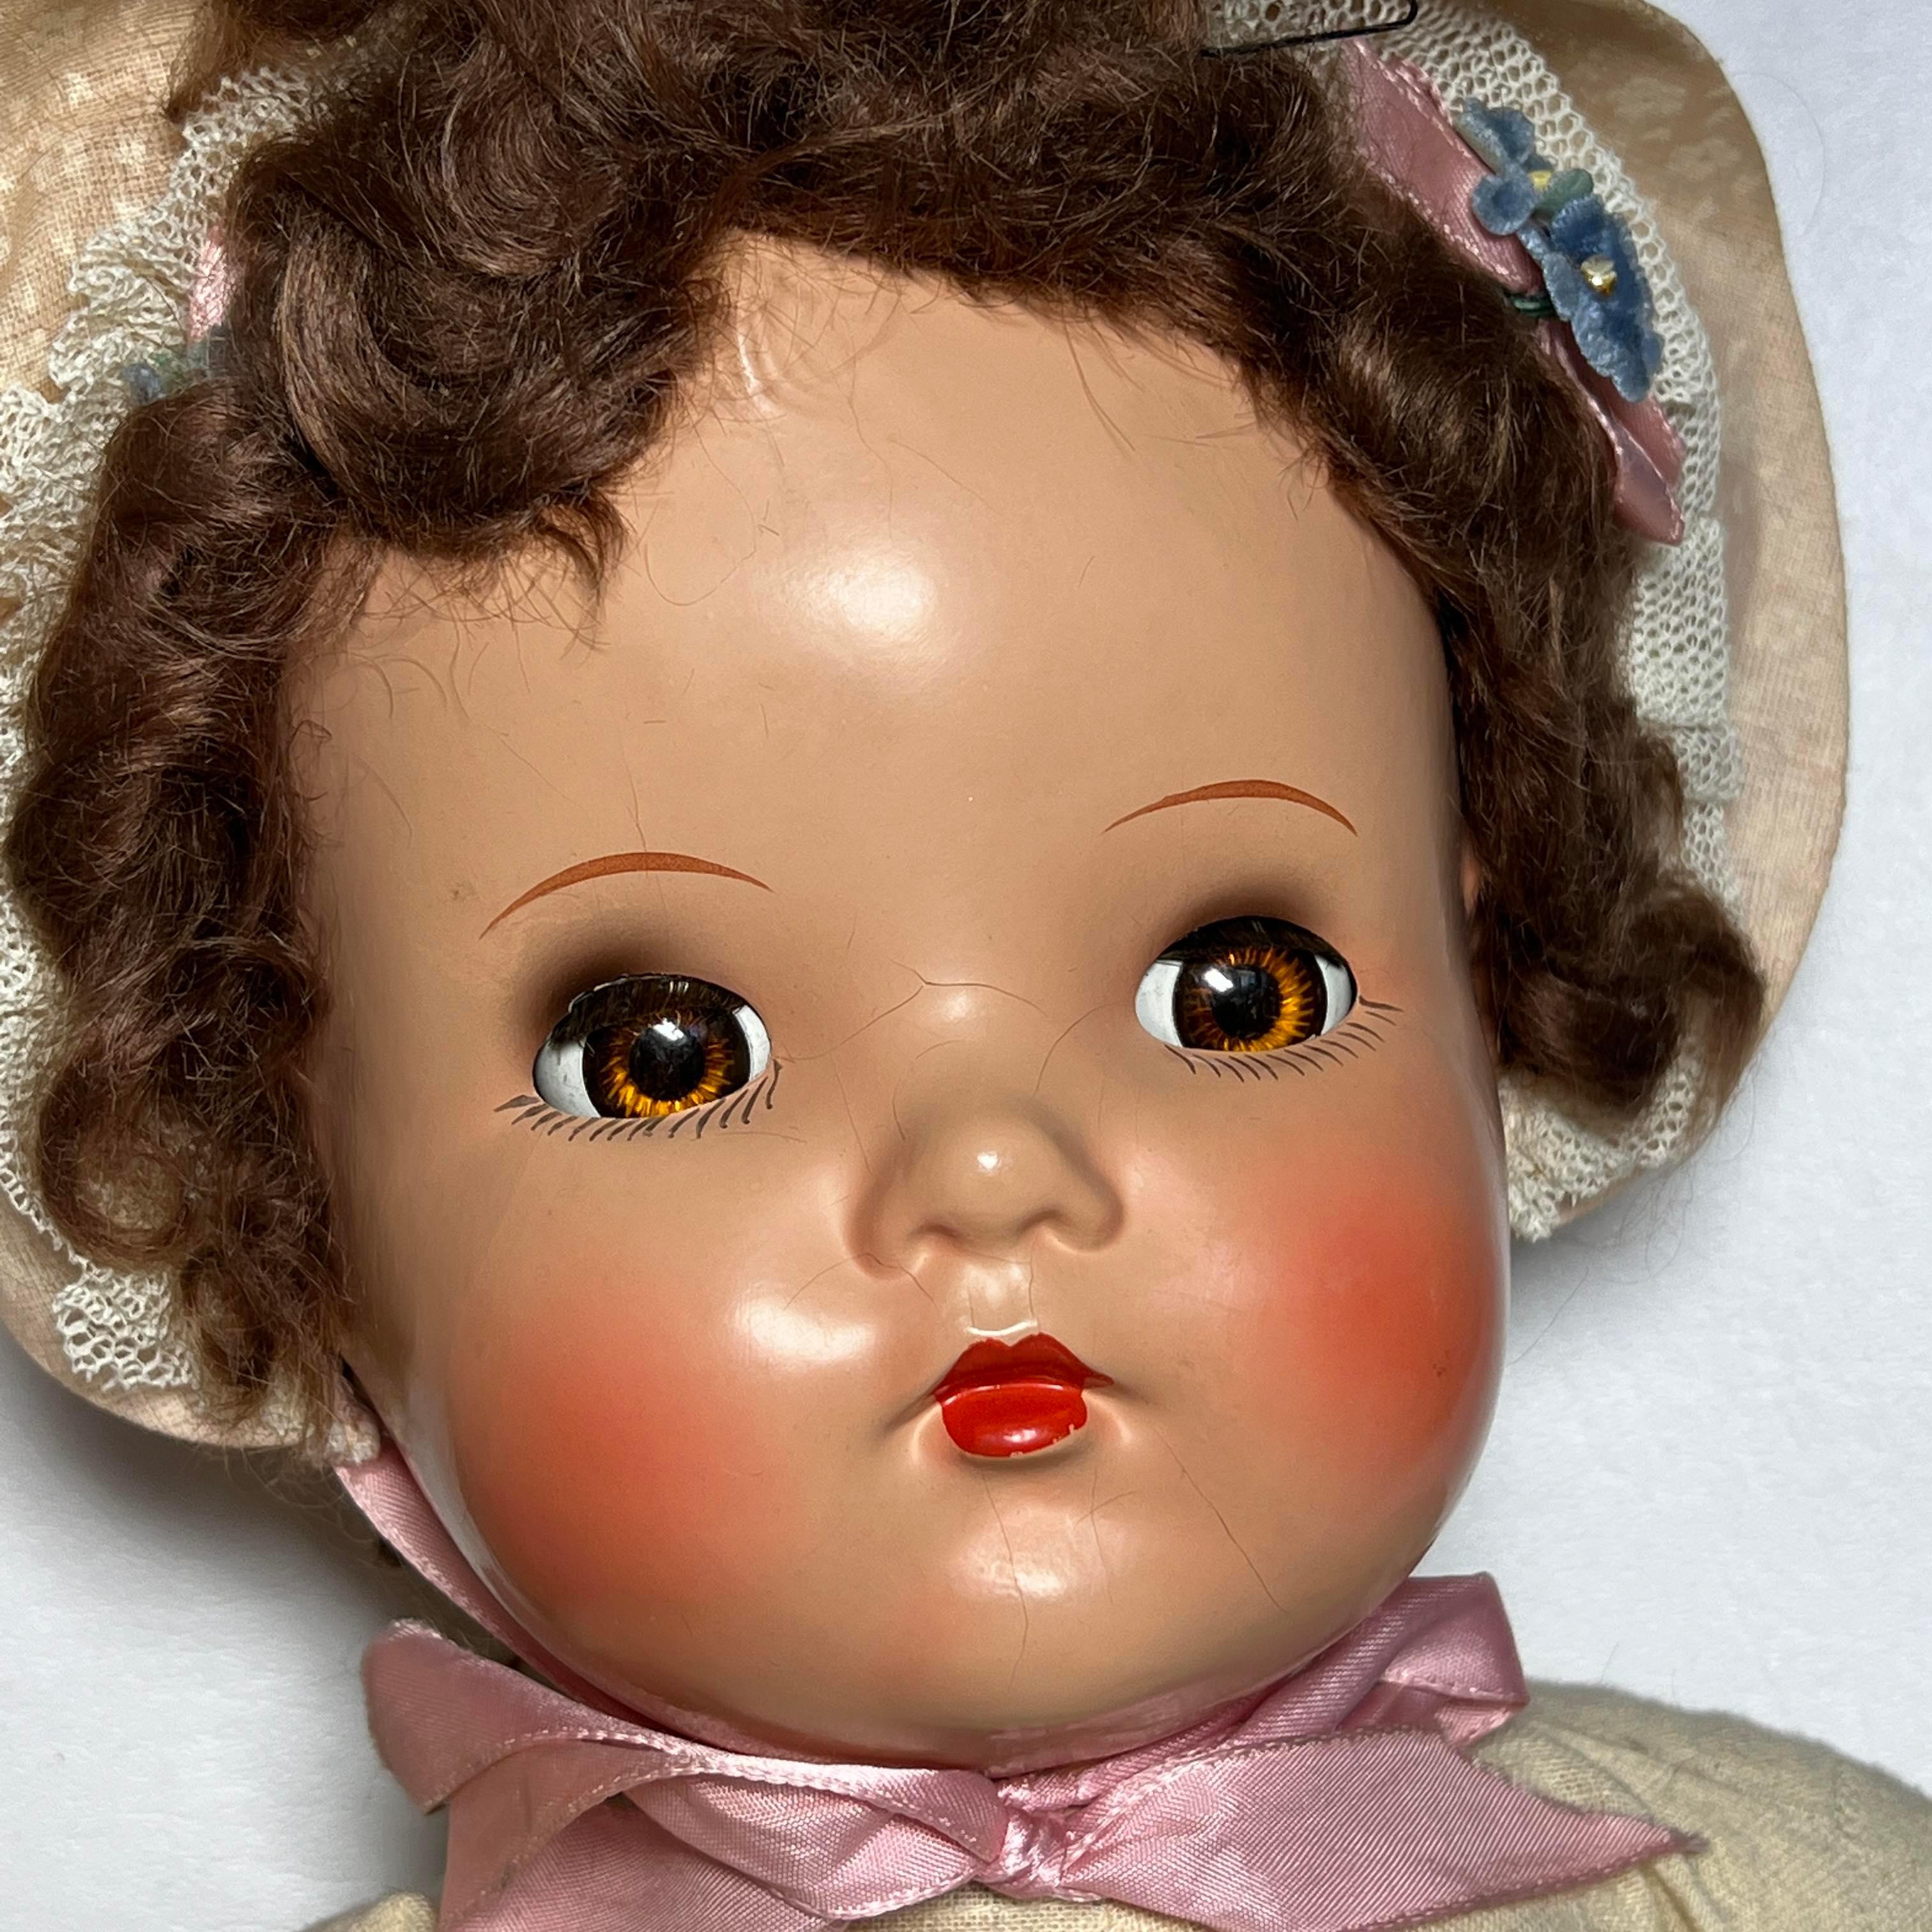 Antique Composition Baby Dolls - One is Madame Alexander